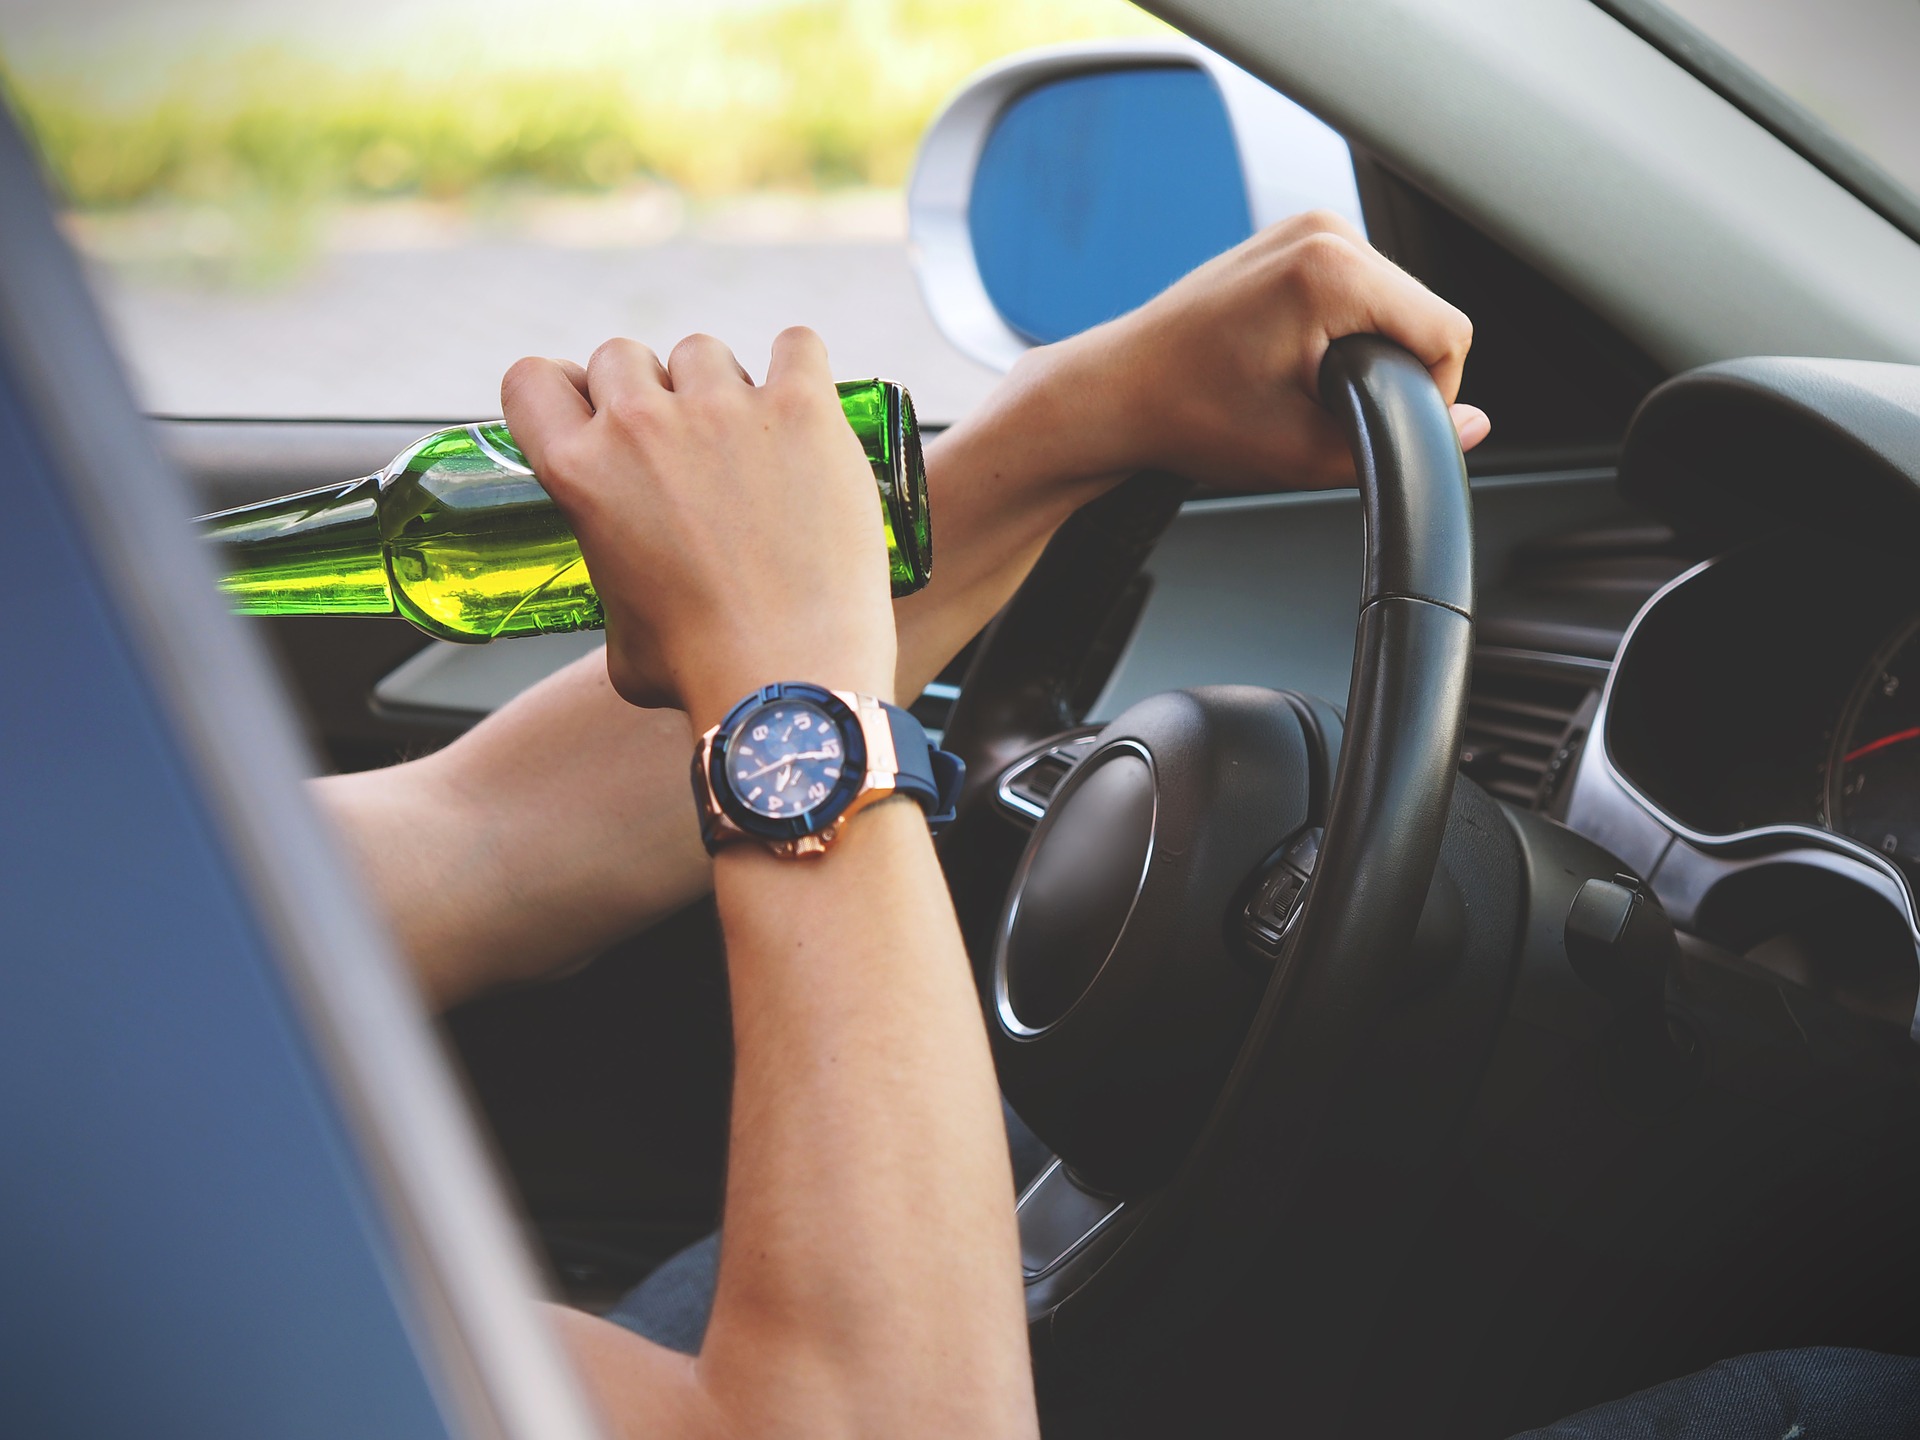 Surge in Drink Drive Deaths Prompts Calls for Action